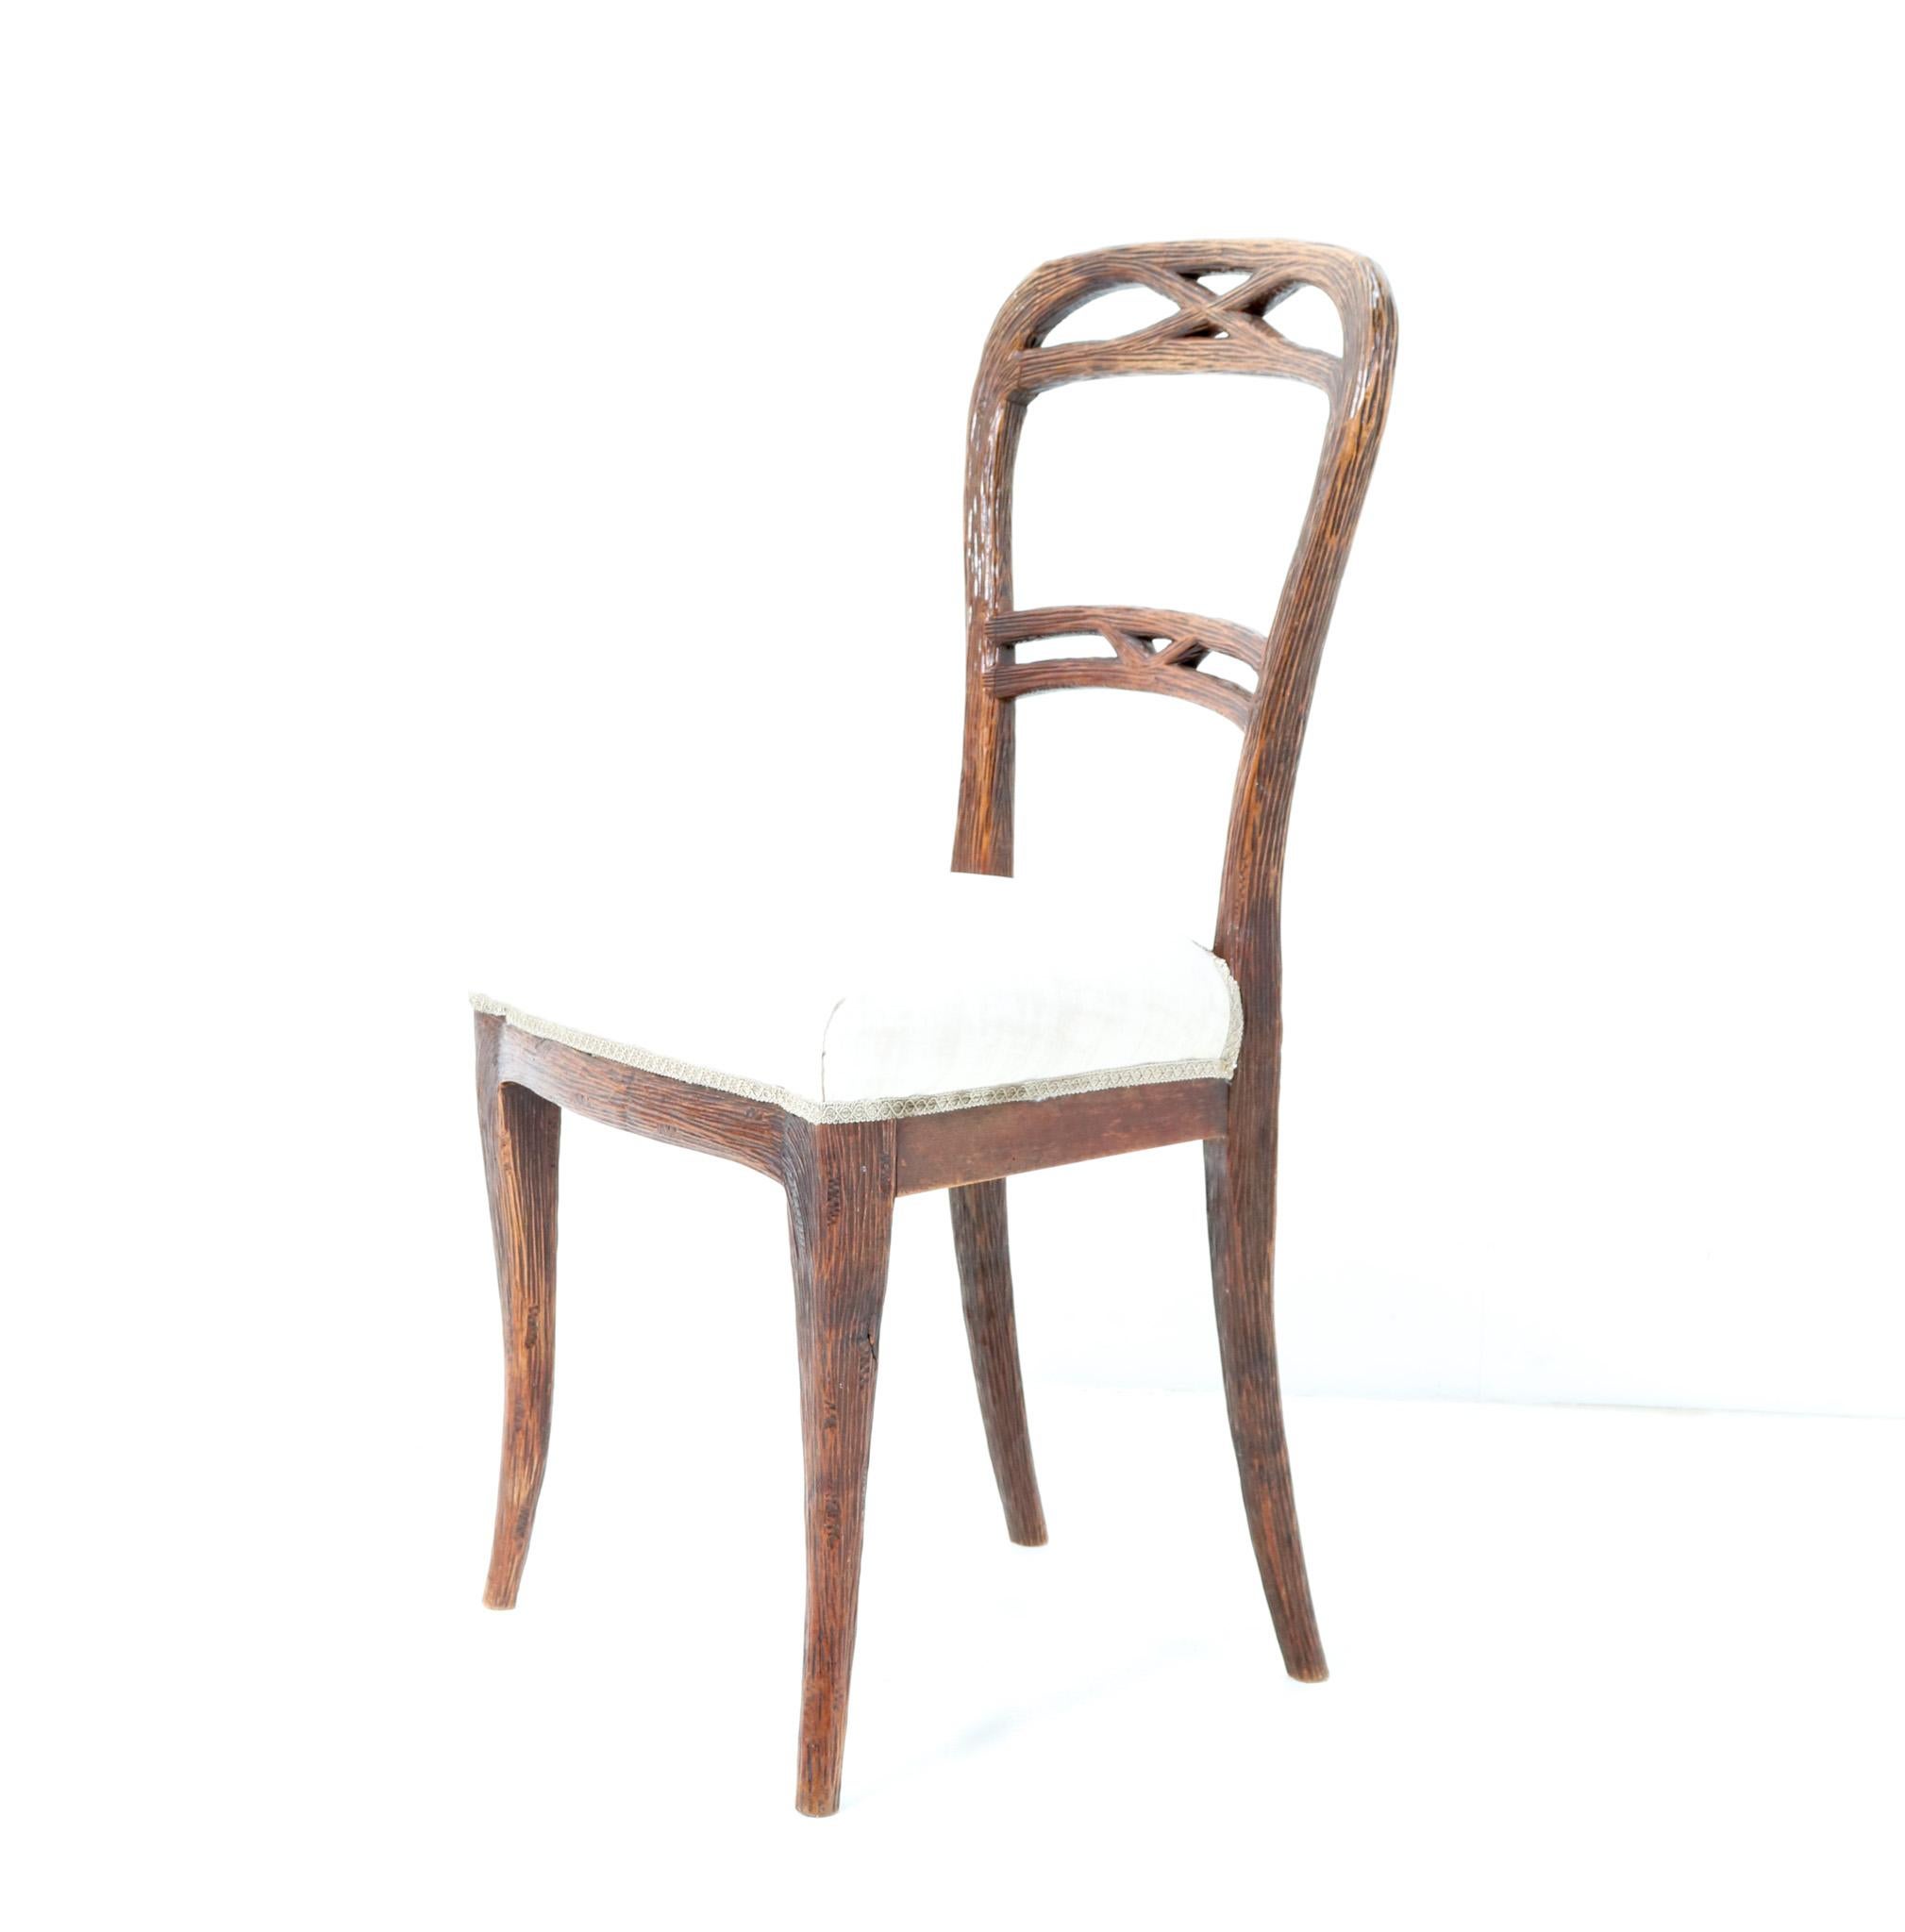 Late 19th Century  Black Forest Walnut Dining  Chairs by Matthijs Horrix for Horrix, 1880s